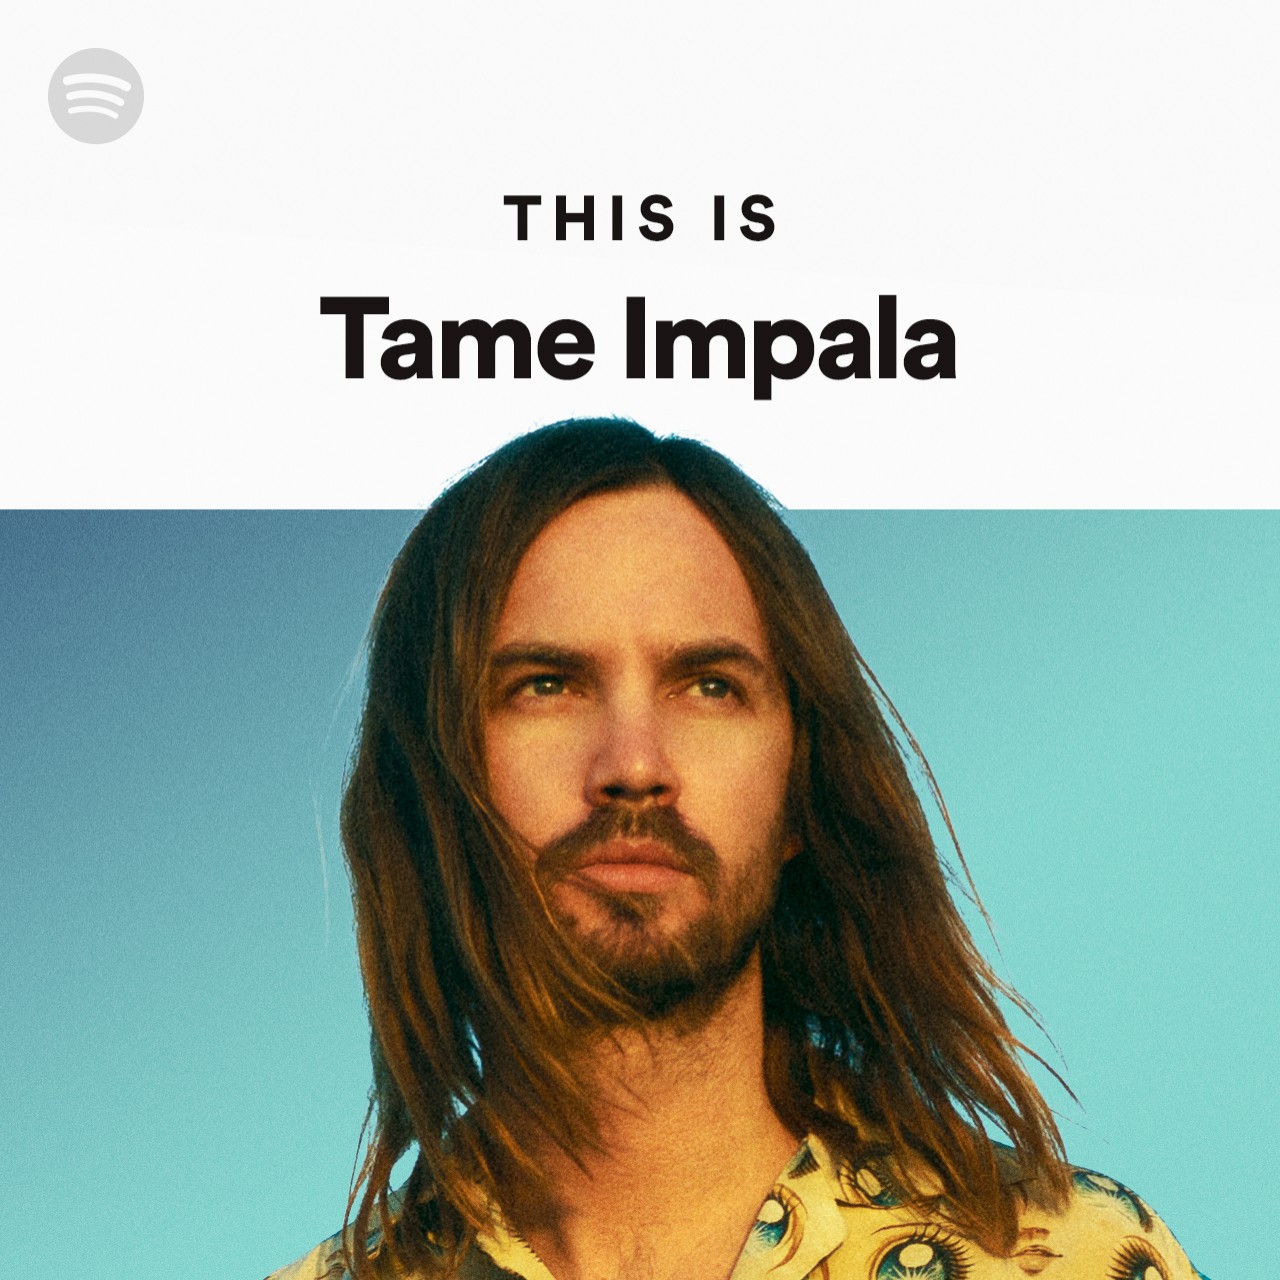 This Is Tame Impala